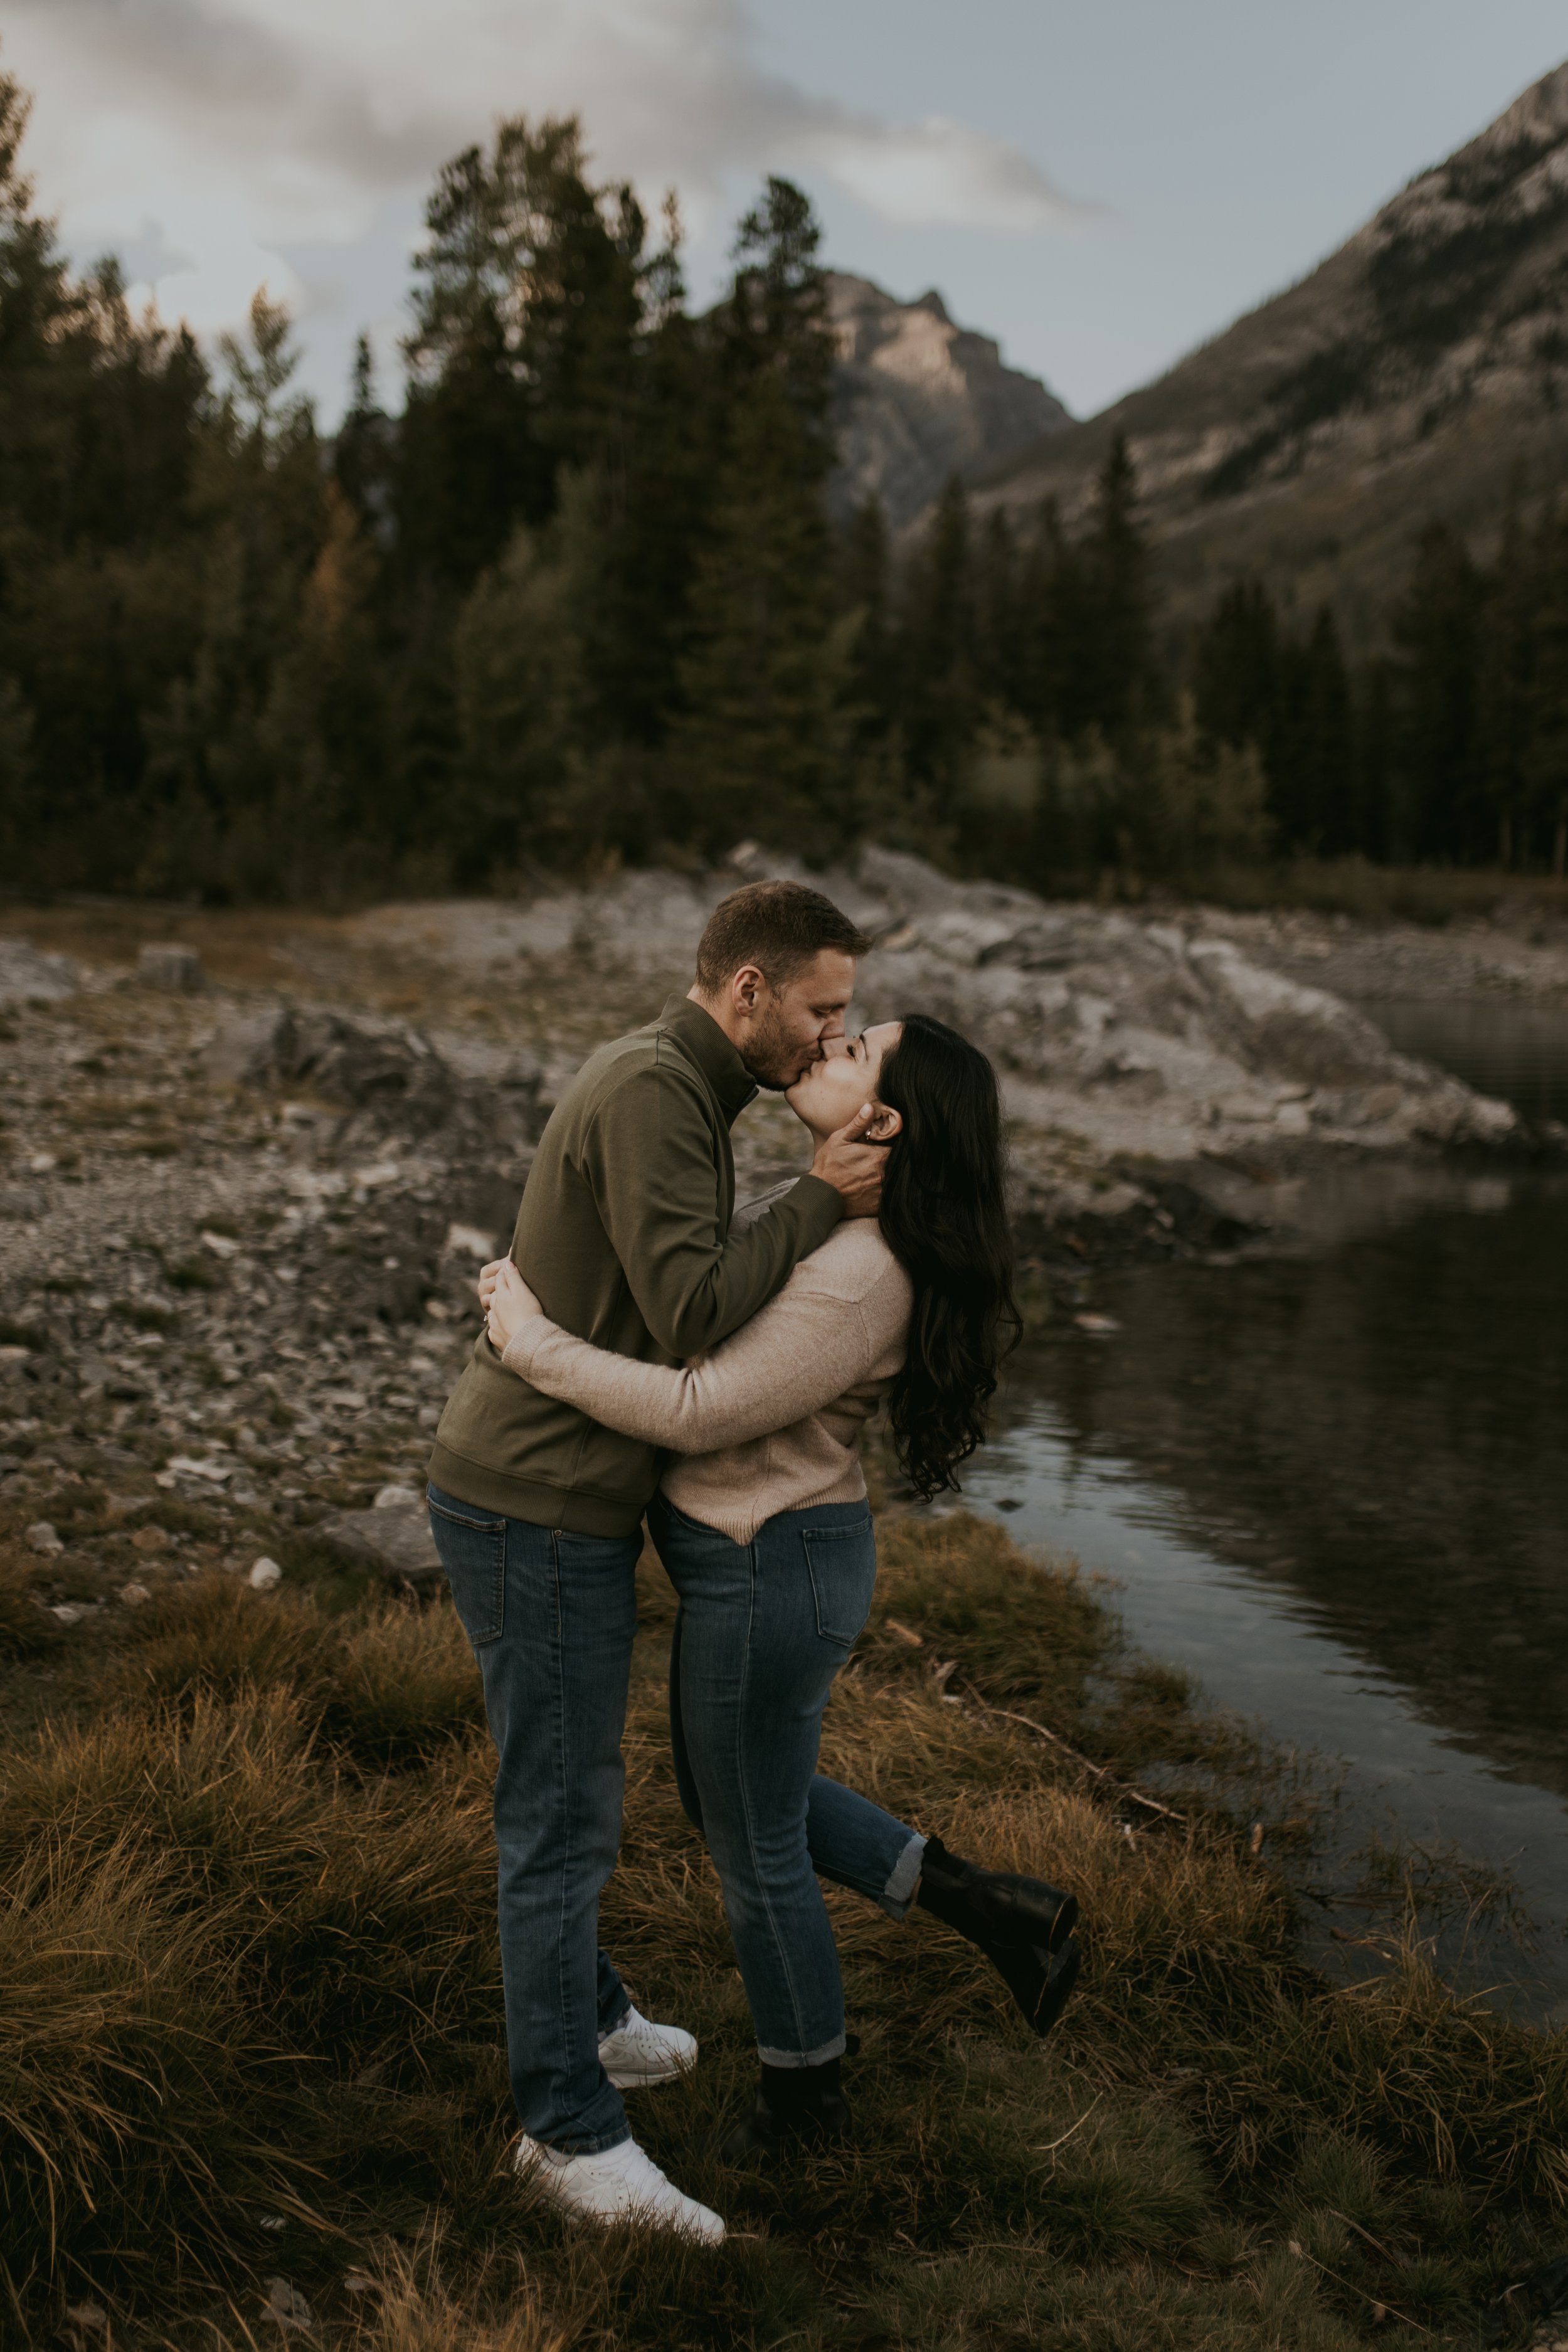 Banff couples photos, banff engagement session, proposal in Banff, Lake Louise proposal photographer in Banff-4.jpg